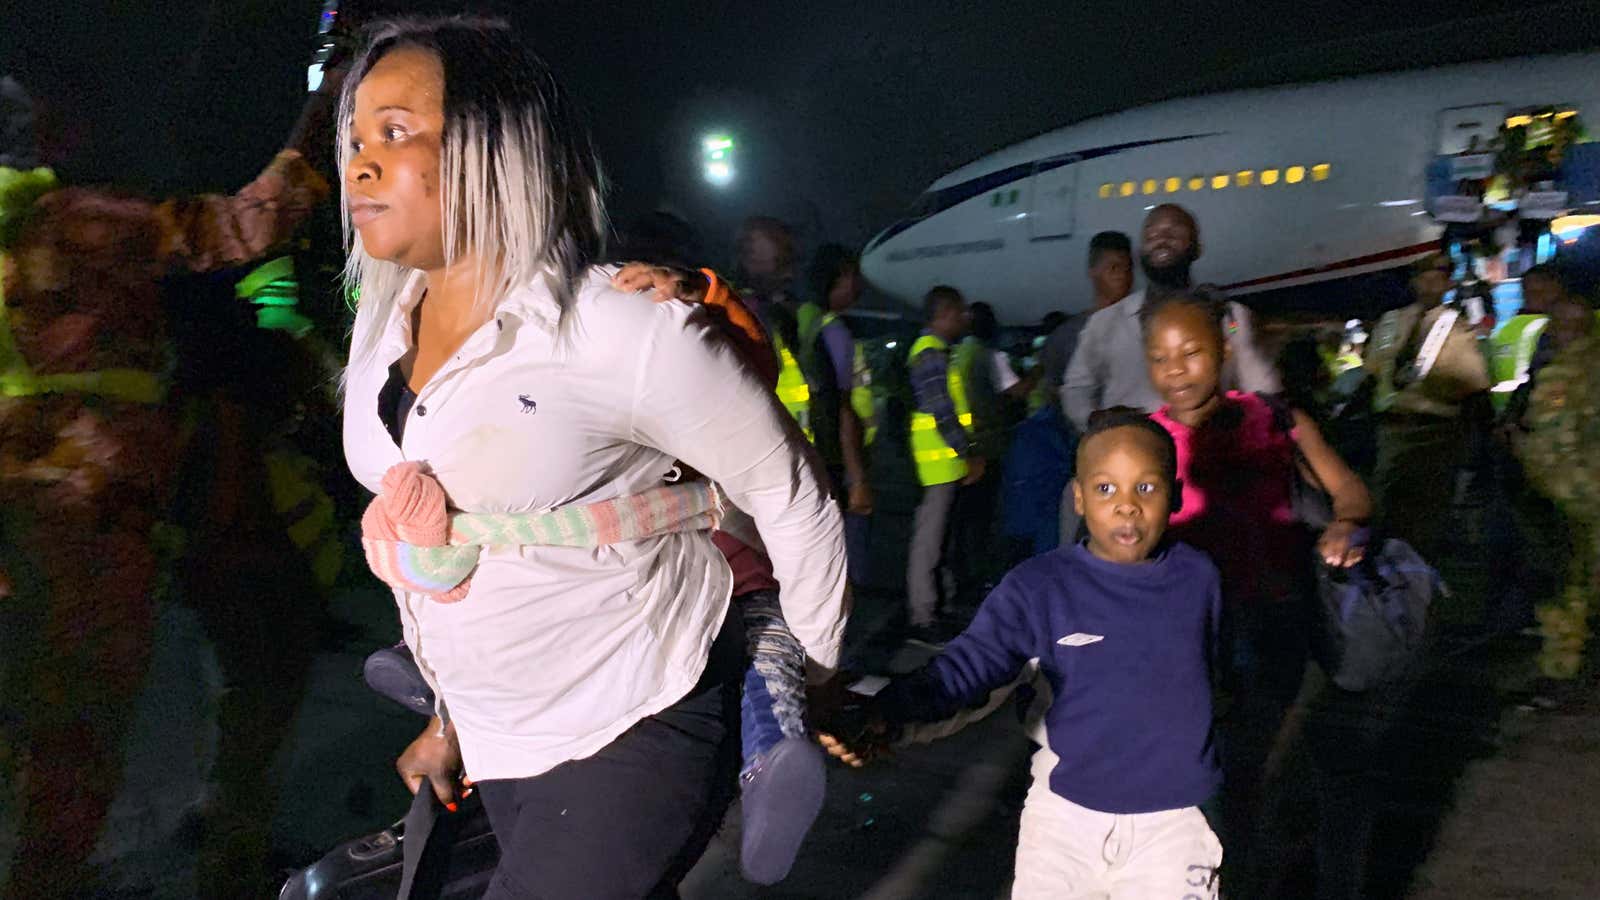 Nigerians, who took free evacuation from South Africa after xenophobic attacks on foreign nationals, arrive to Lagos airport, Nigeria Sep. 11, 2019.